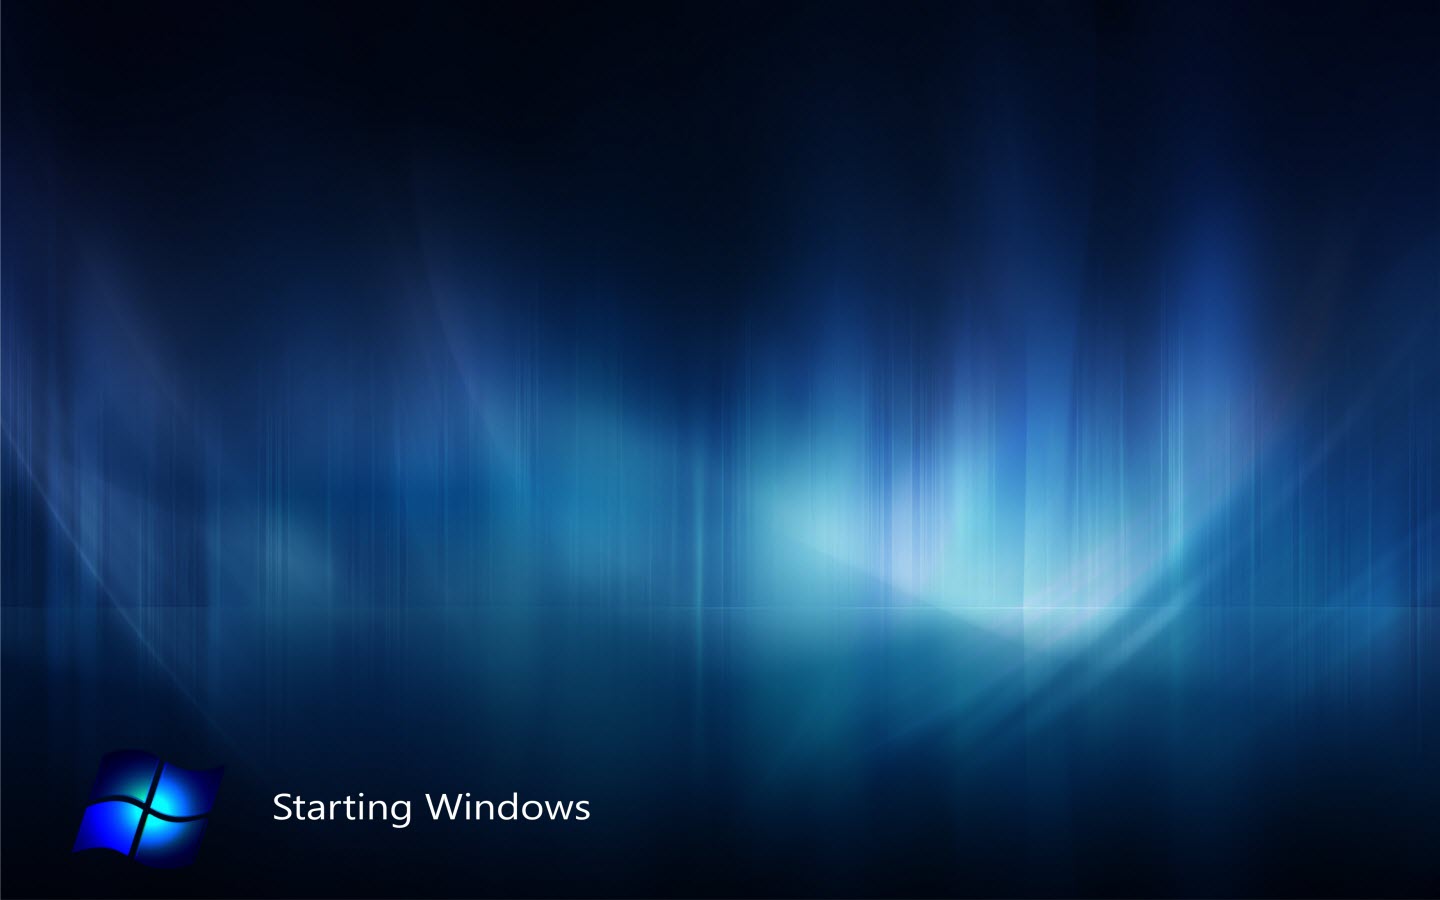 Windows 8 developers version released pre beta version available for